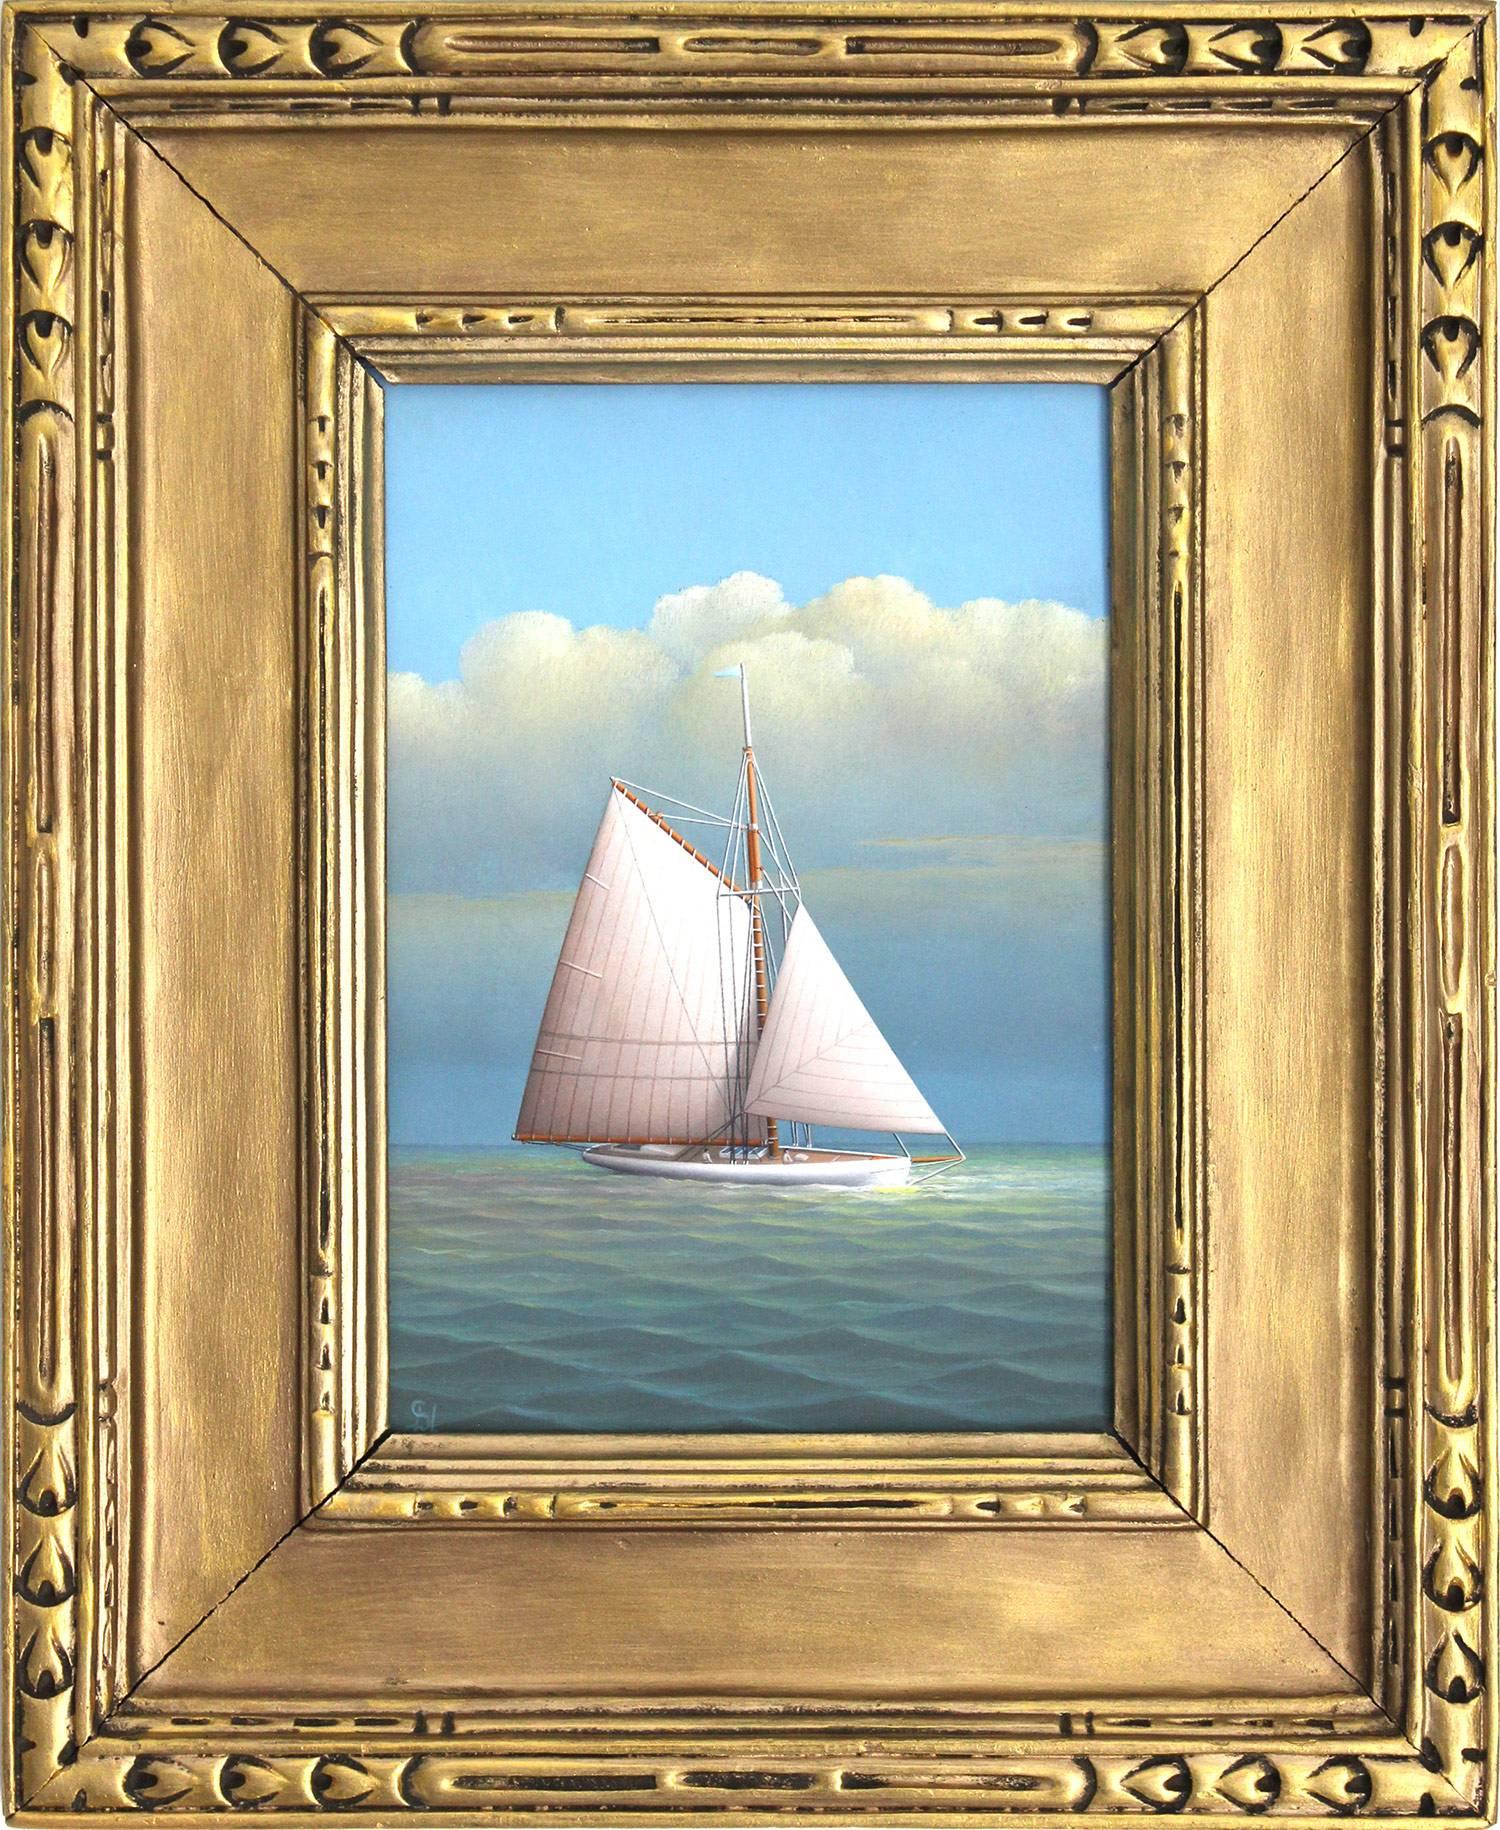 George Nemethy Landscape Painting - Sailing on the Pacific